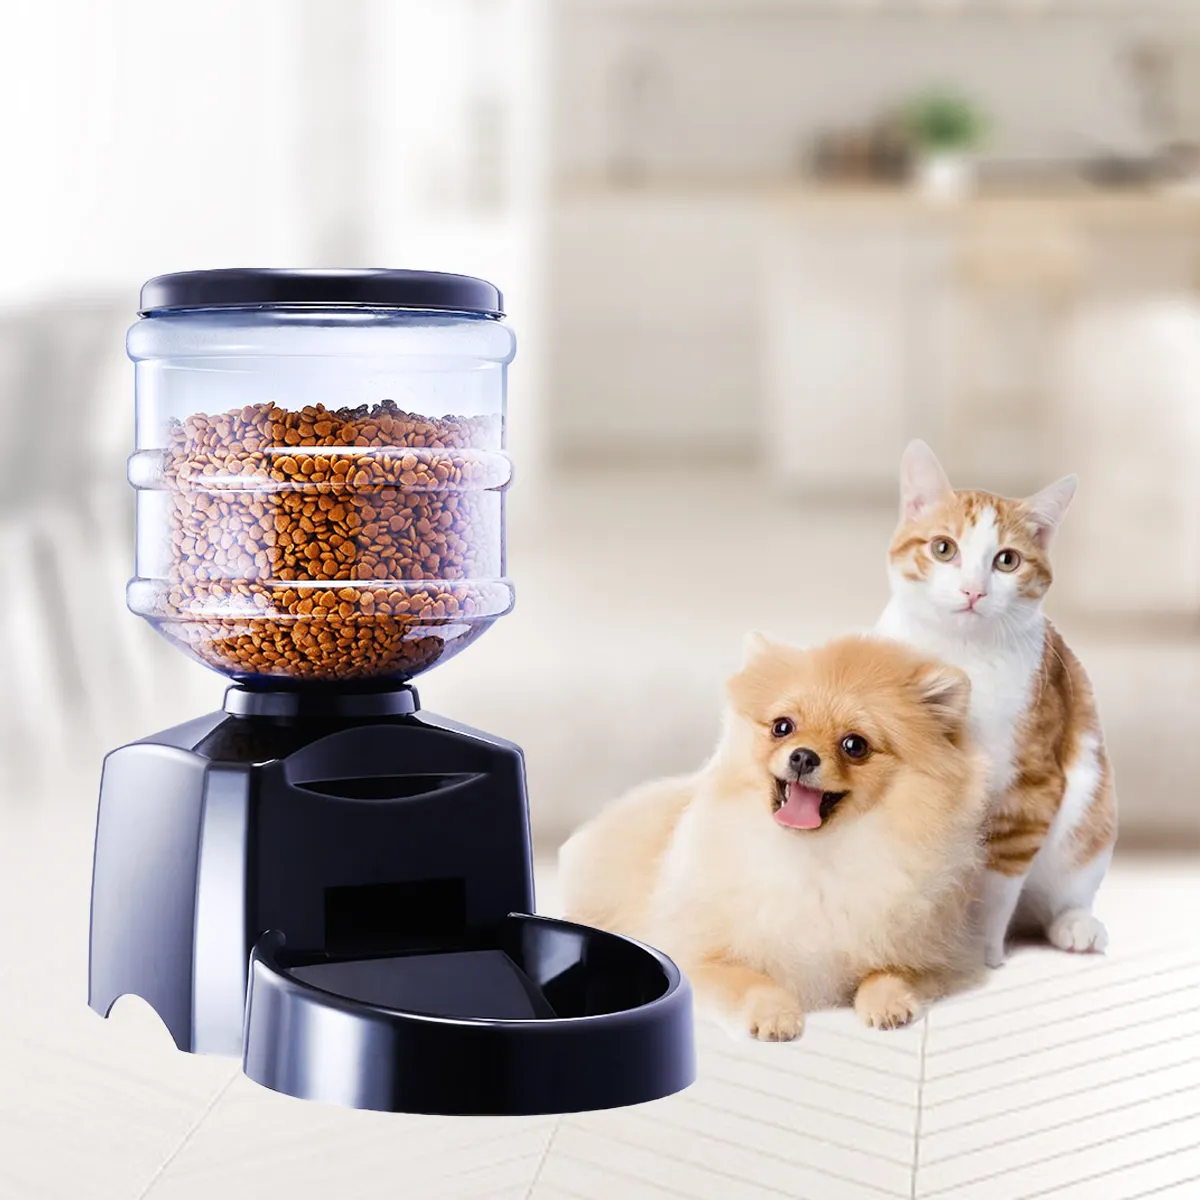 Cat Food Bowl by Manual Control Pet feeder with LCD Display and Voice Recording Automatic Pet Feeder Cat Food Dispense